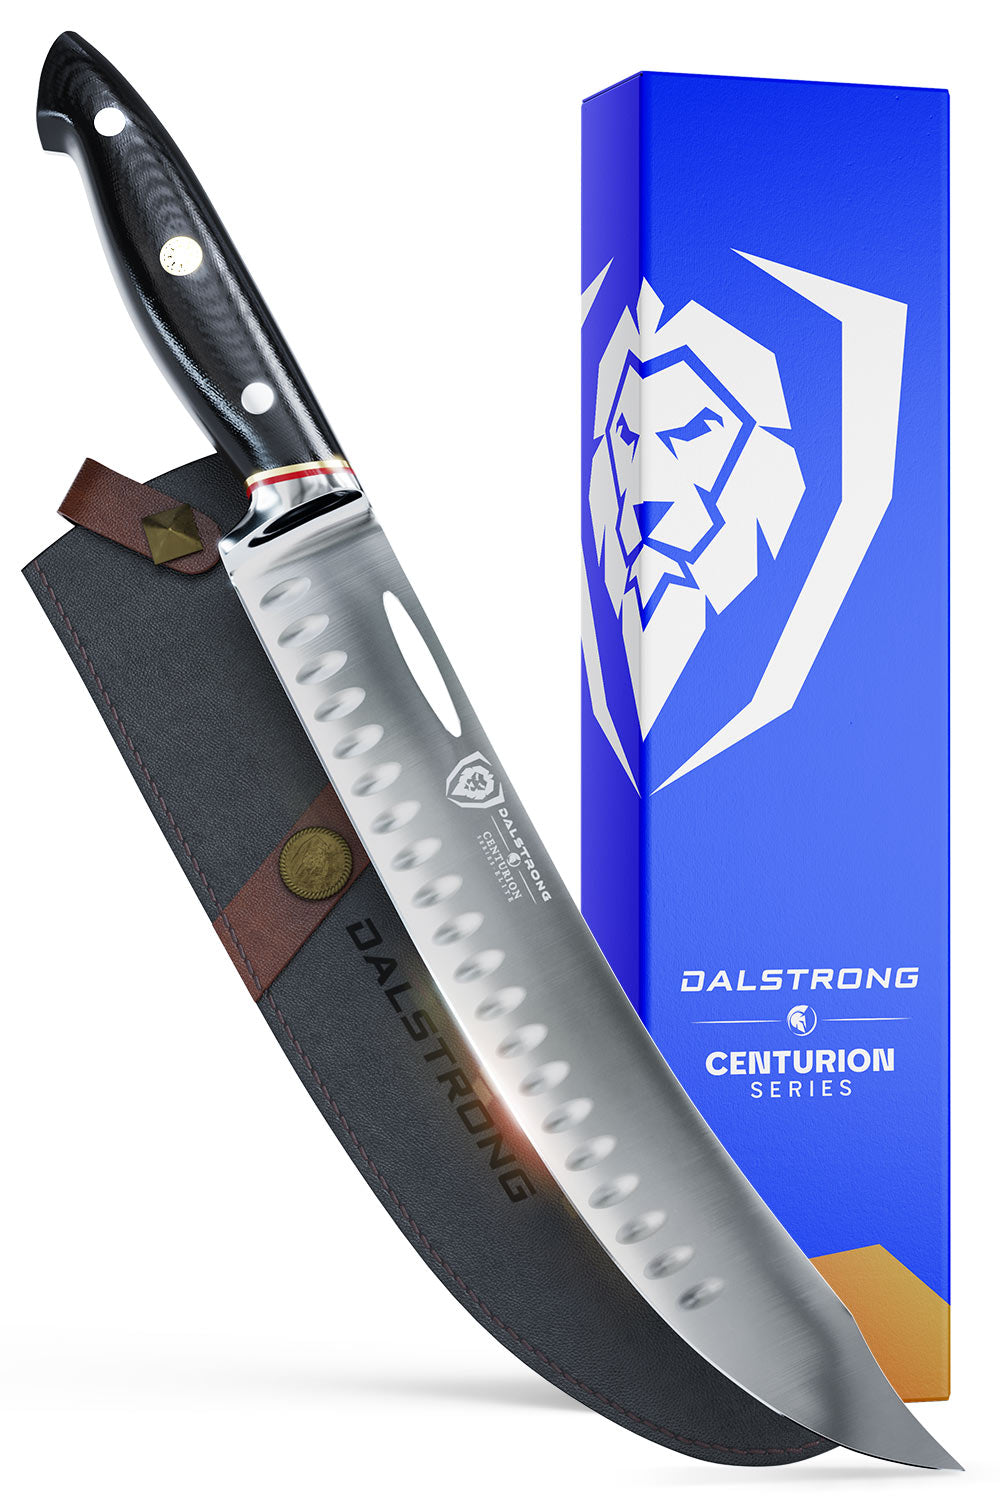 Dalstrong centurion series 10 inch butcher and breaking knife in front of it's premium packaging.